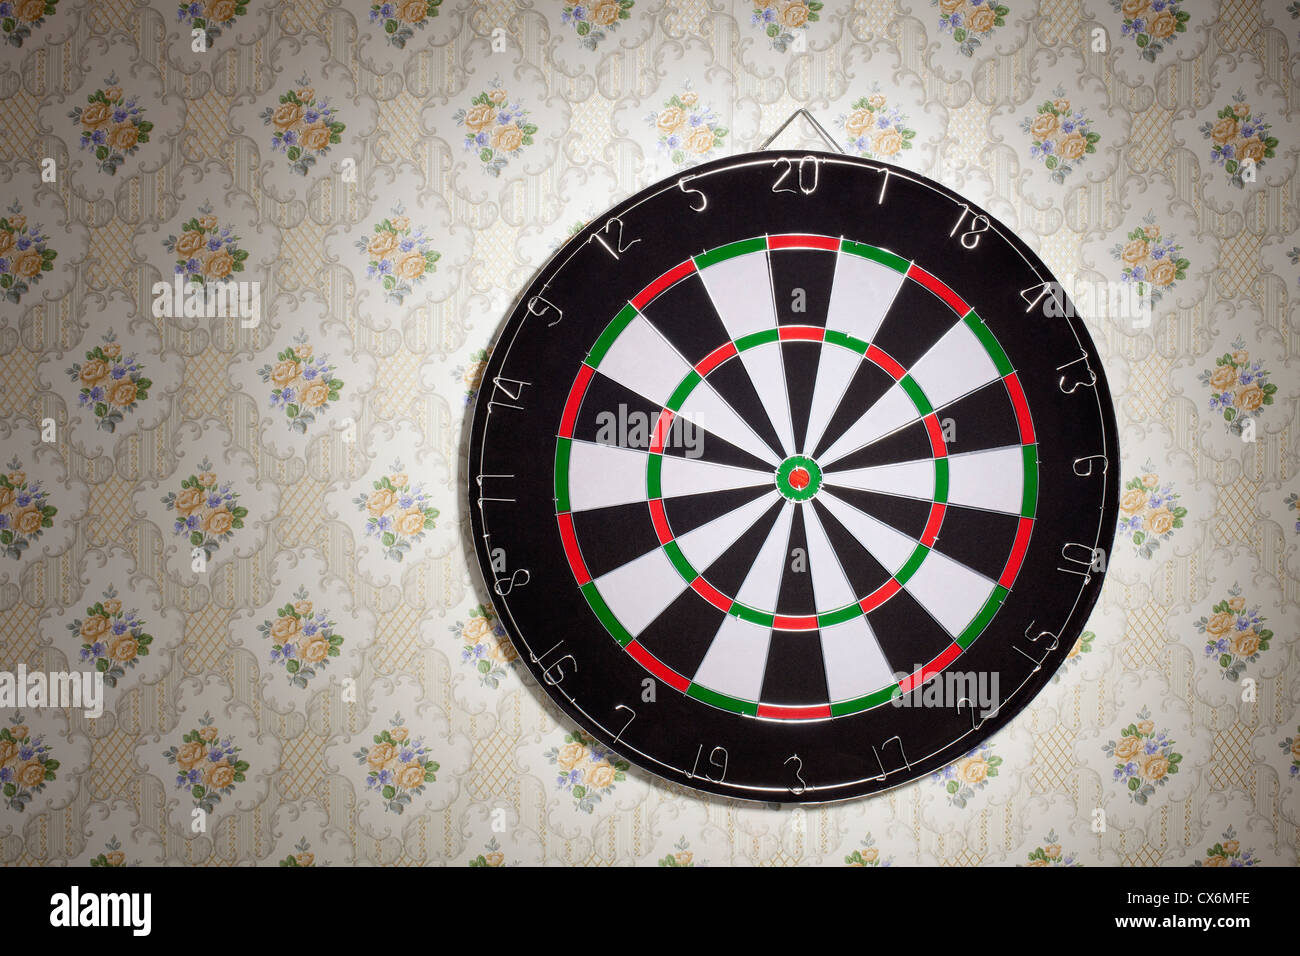 A dartboard hanging on a wallpapered wall Stock Photo